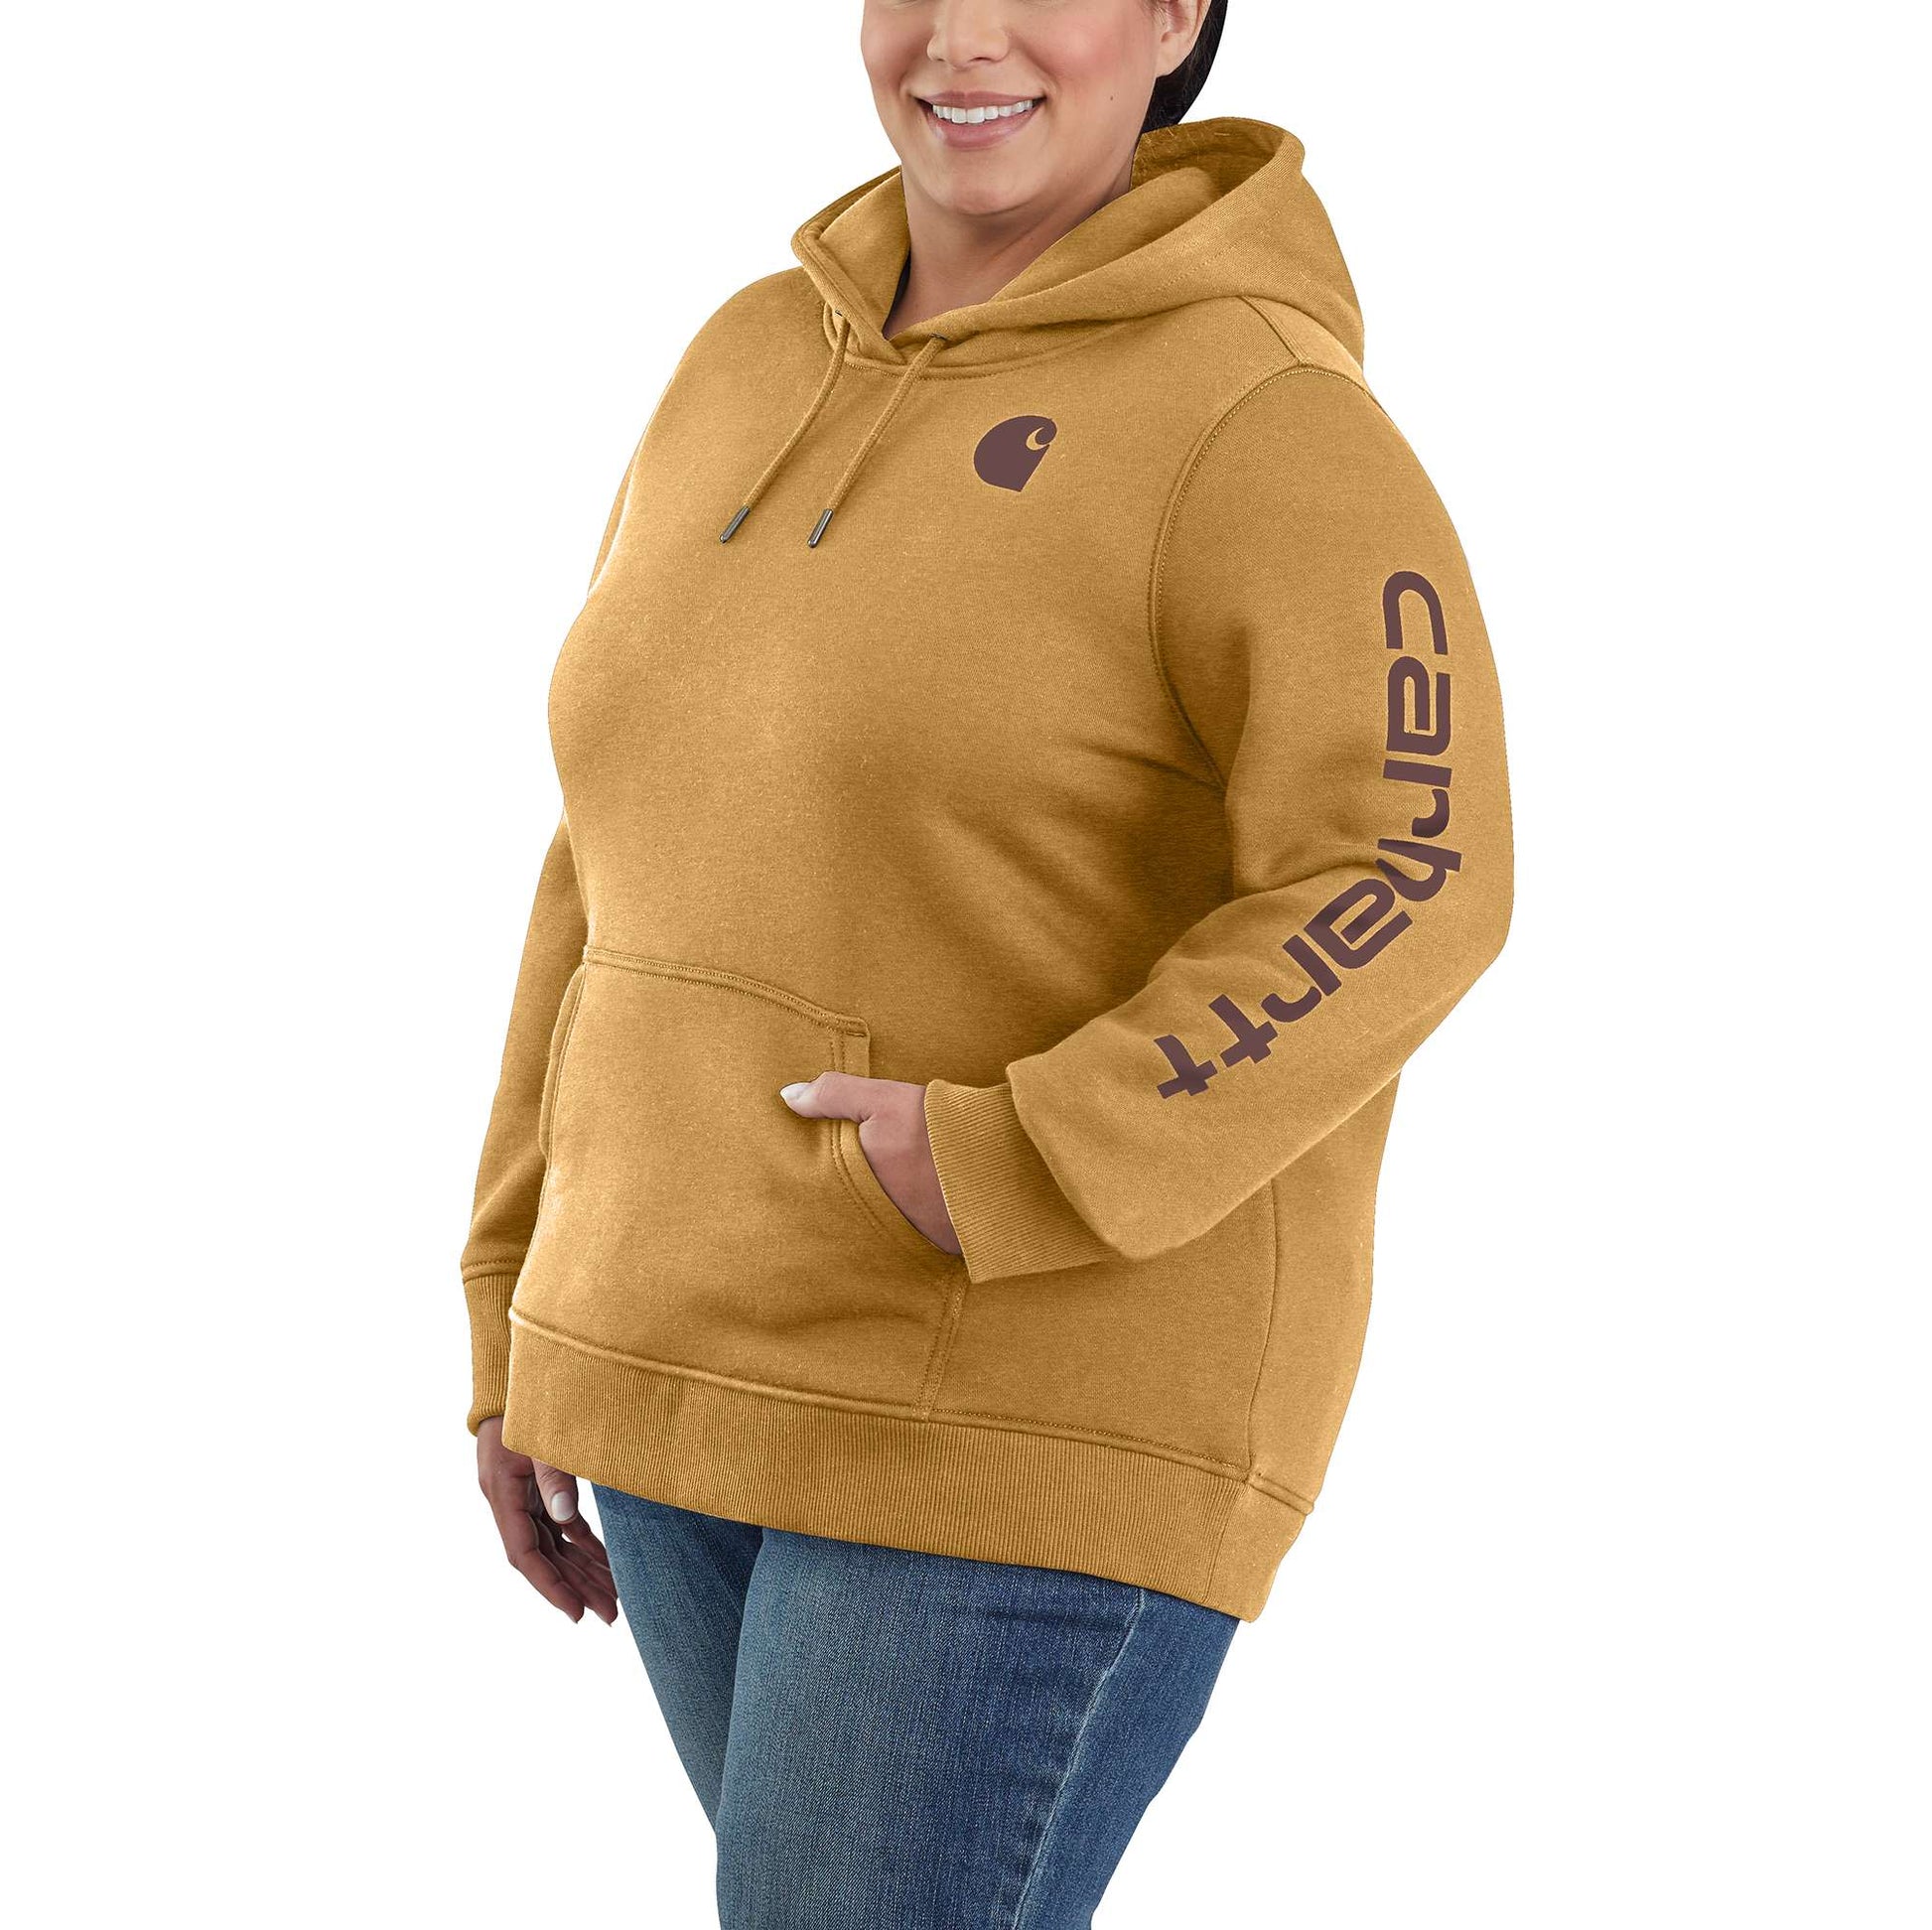 carhartt Womens Relaxed Fit Midweight Logo Sleeve graphic Sweatshirt,  Magenta Agate Heather